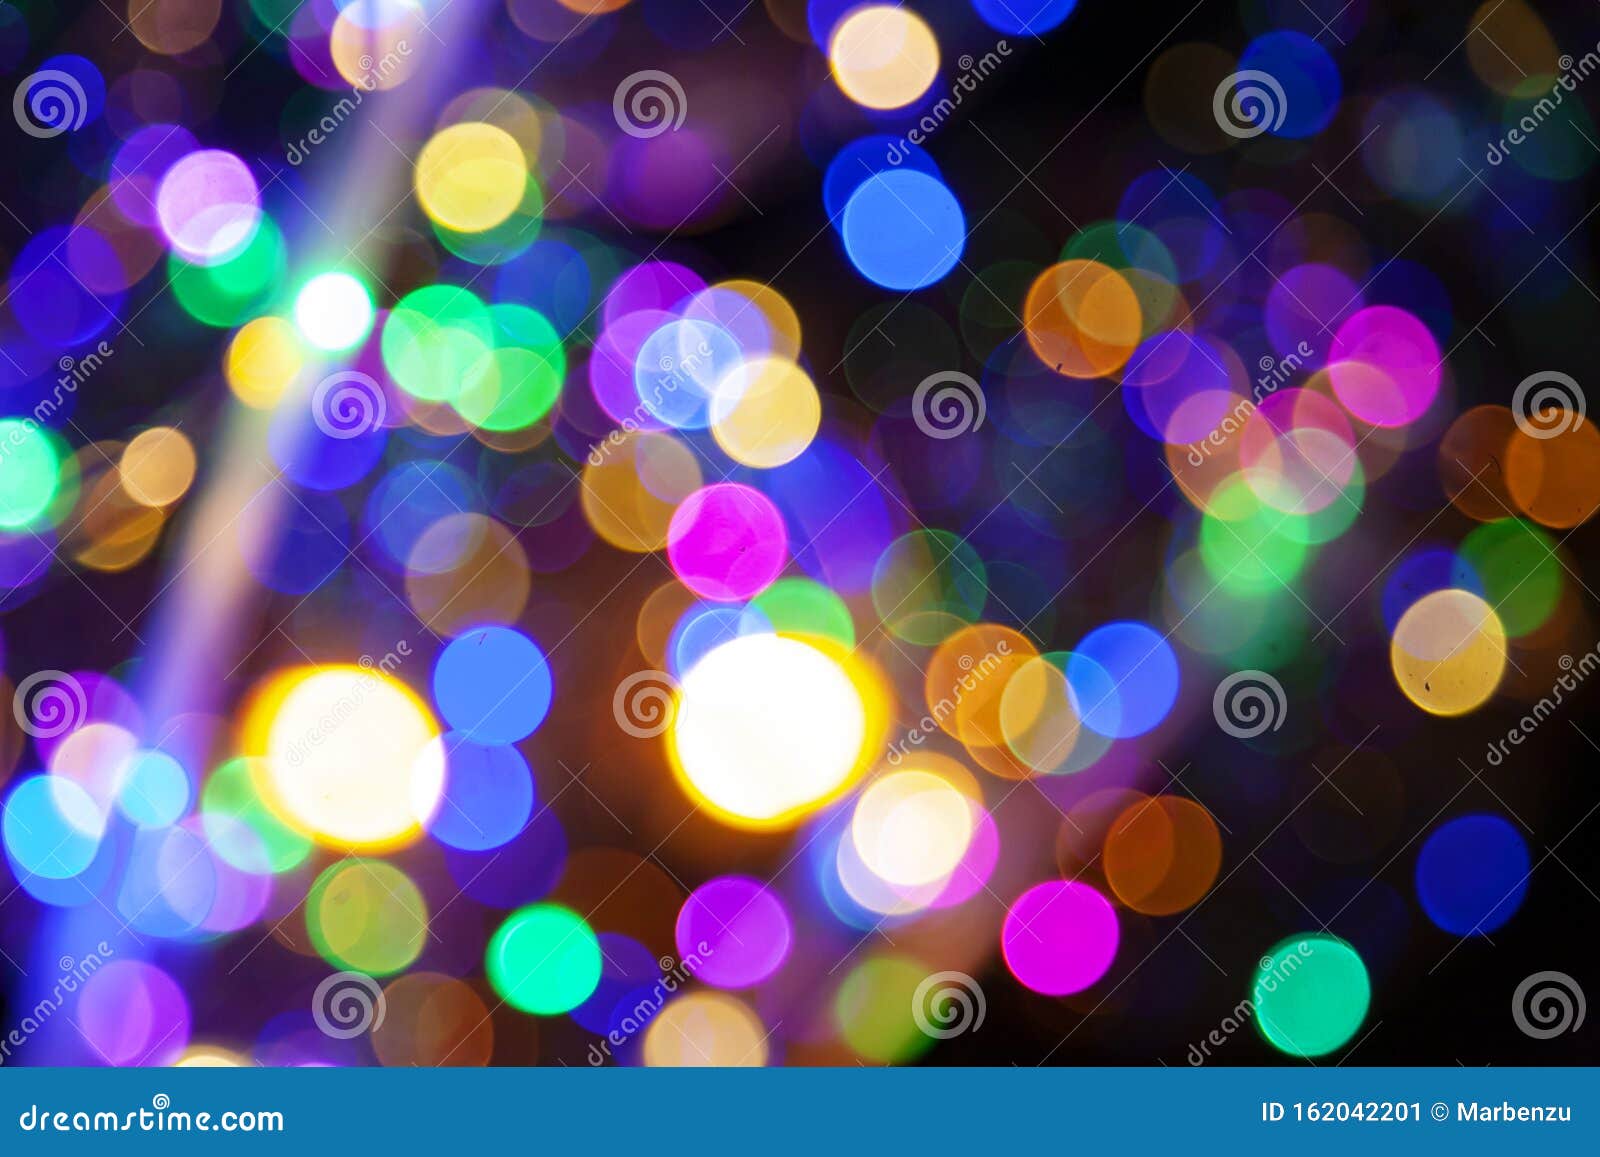 Colorful Light Dots Bokeh Abstract Background Stock Image - Image of  spiritual, crazy: 162042201